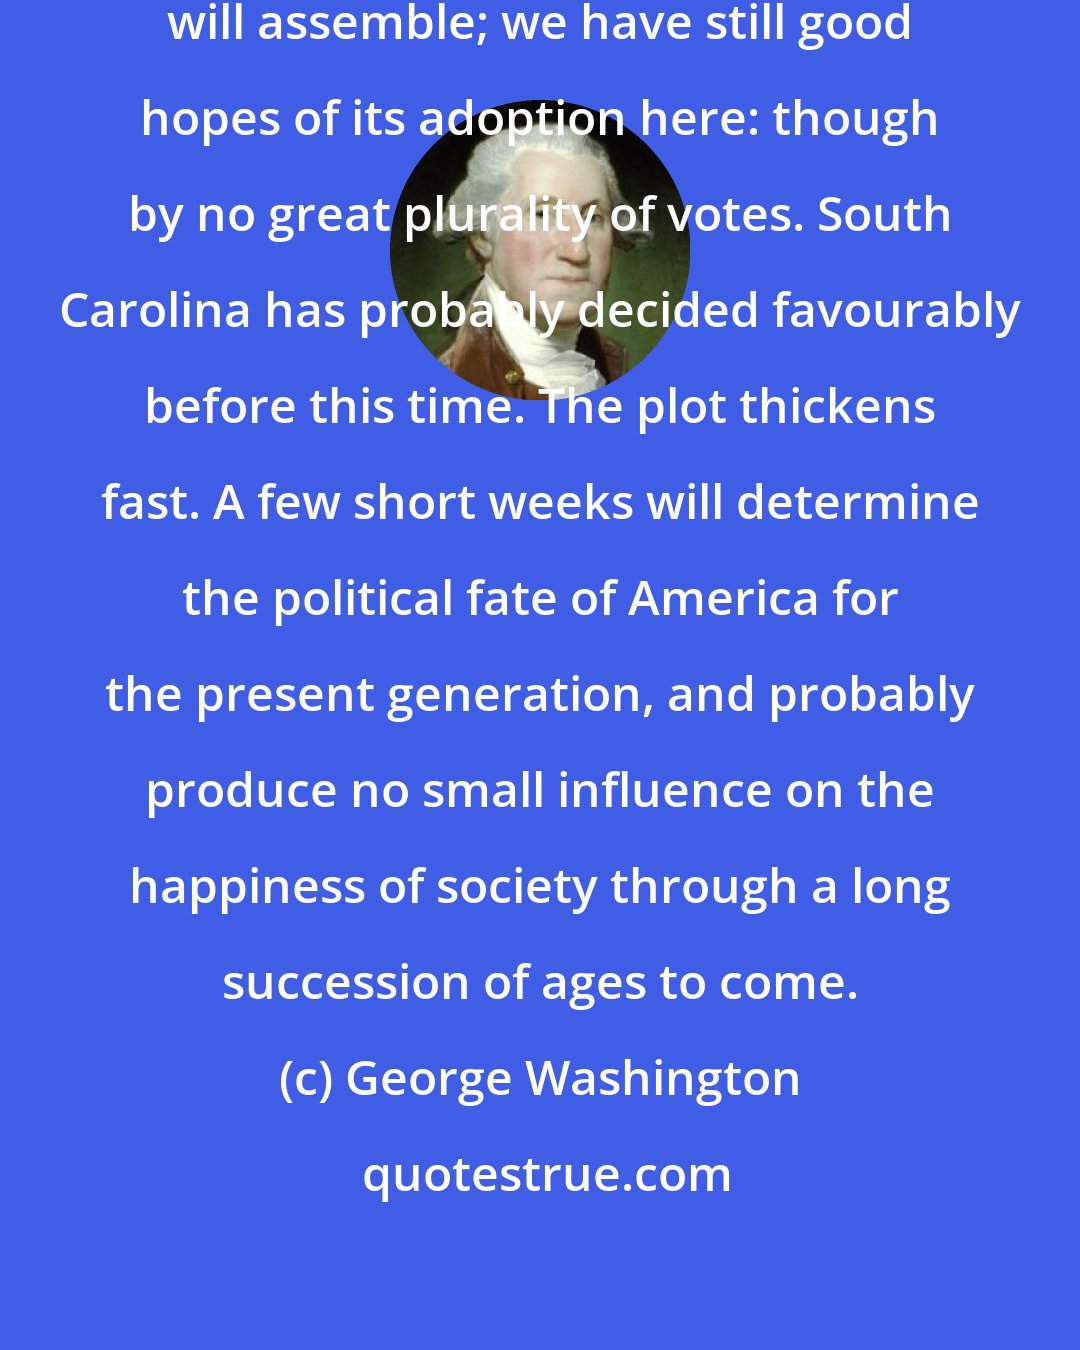 George Washington: Next Monday the Convention in Virginia will assemble; we have still good hopes of its adoption here: though by no great plurality of votes. South Carolina has probably decided favourably before this time. The plot thickens fast. A few short weeks will determine the political fate of America for the present generation, and probably produce no small influence on the happiness of society through a long succession of ages to come.